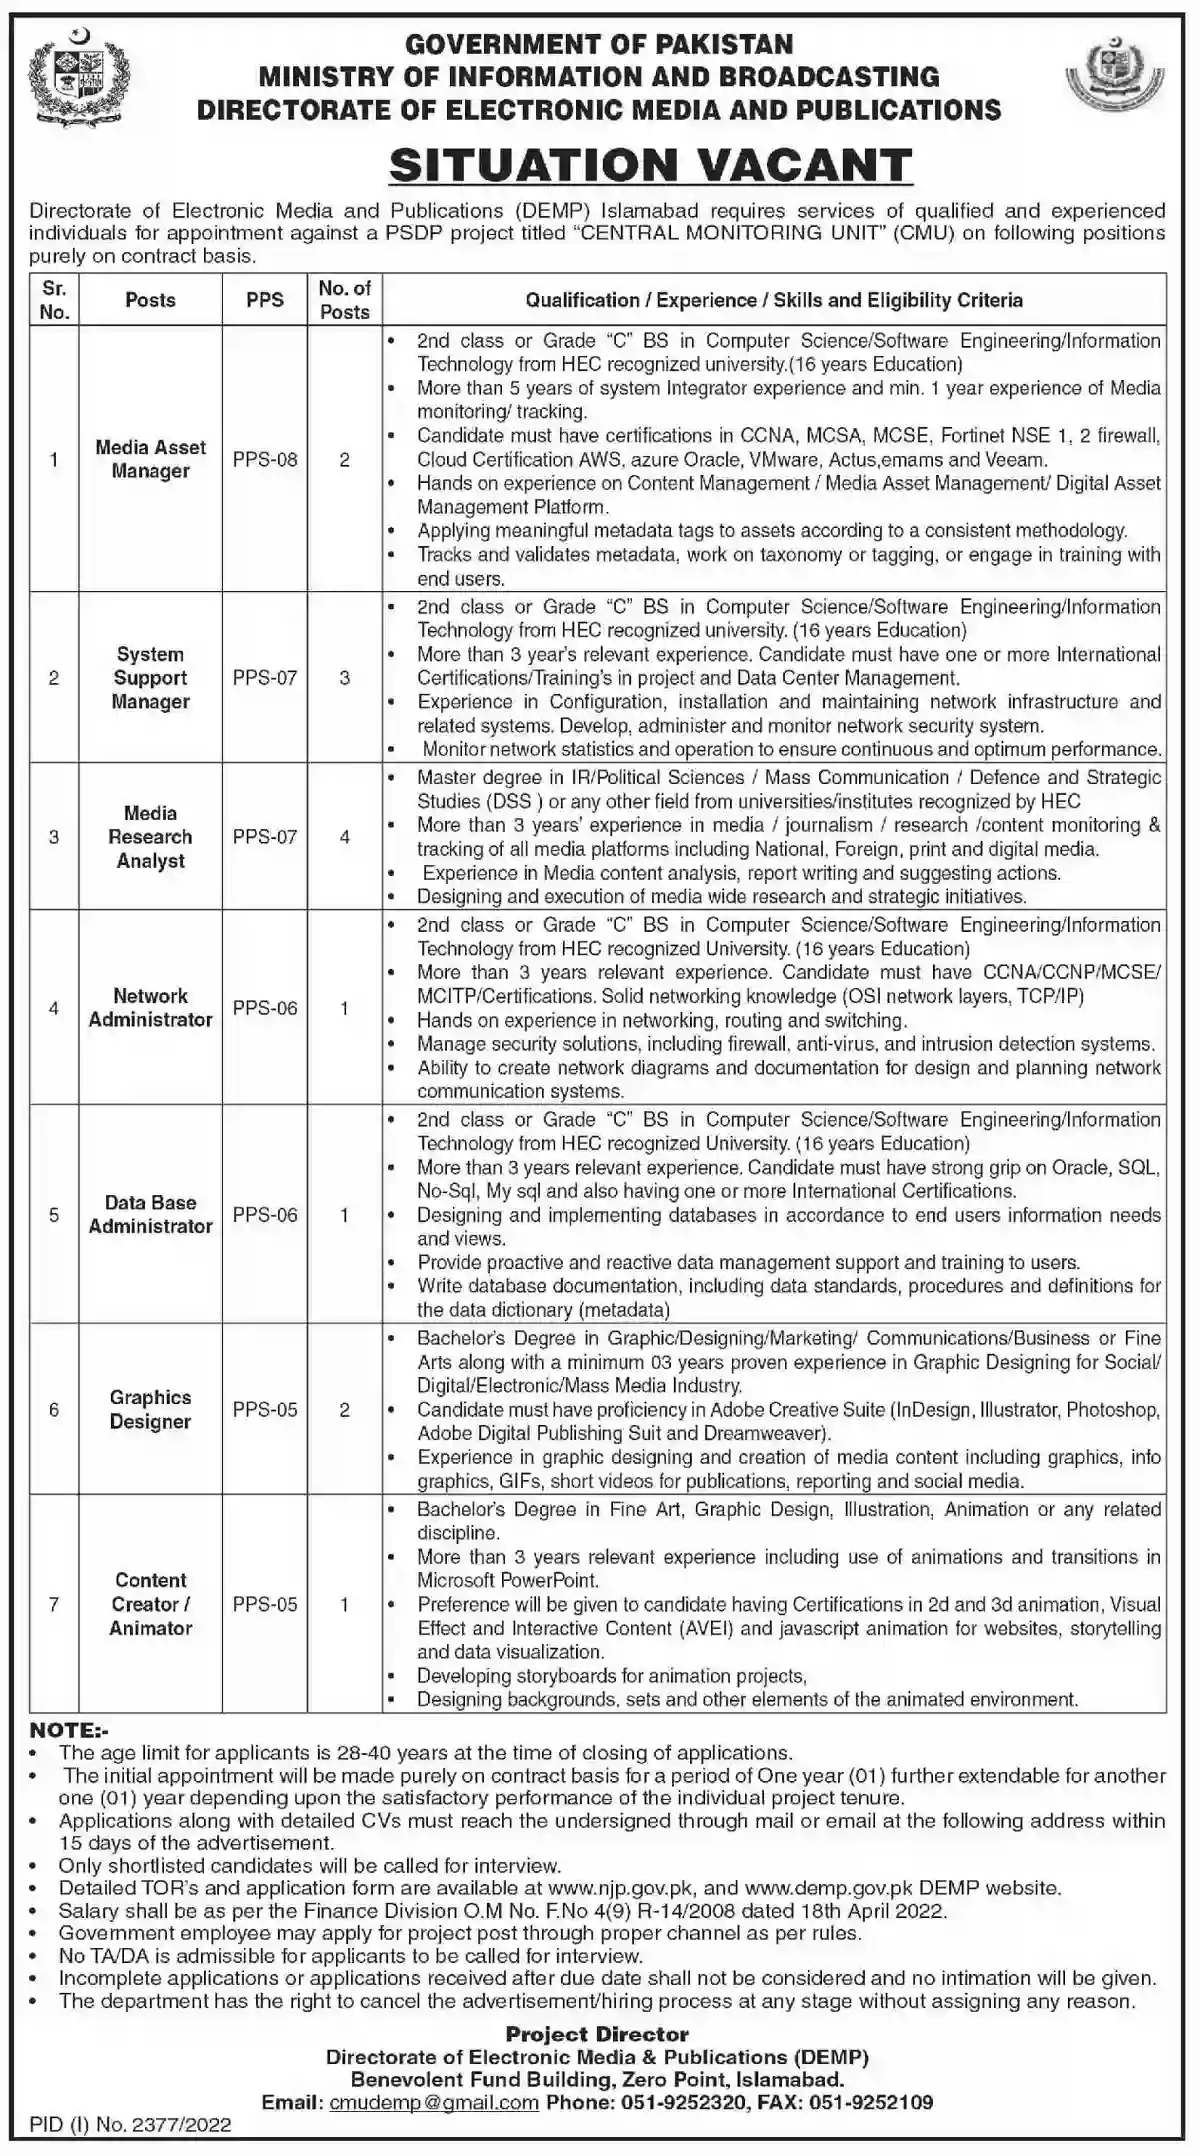 Ministry of Information and Broadcasting MOIB Jobs 2022 DEMP Islamabad